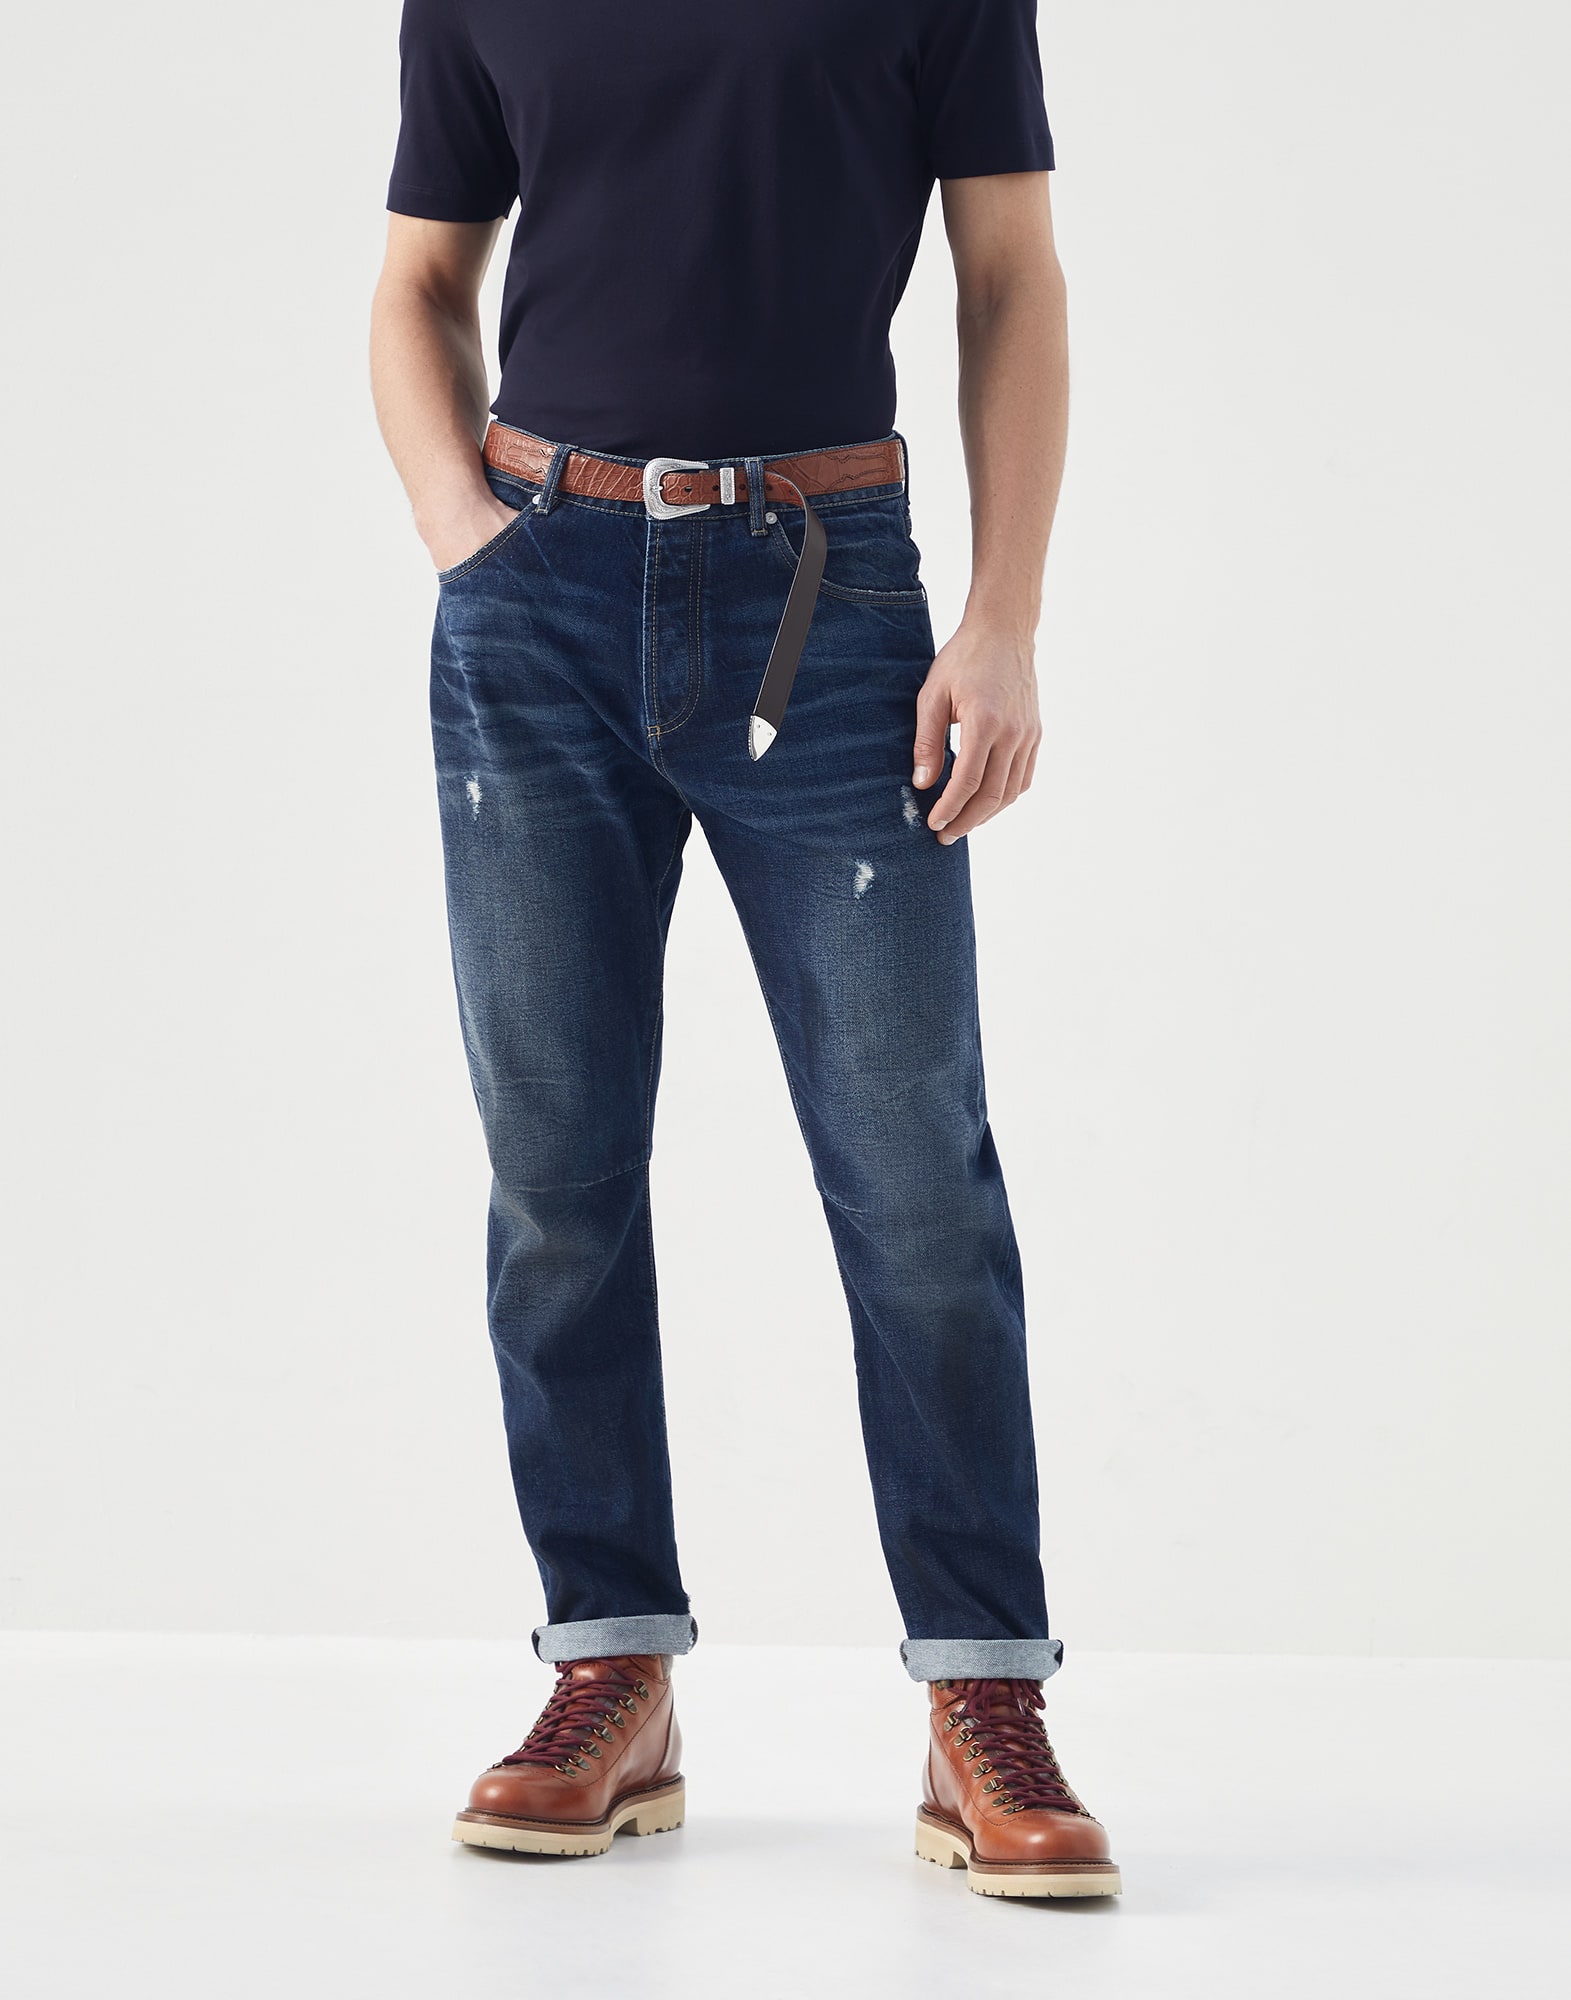 Denim Trousers with Rips - Front view